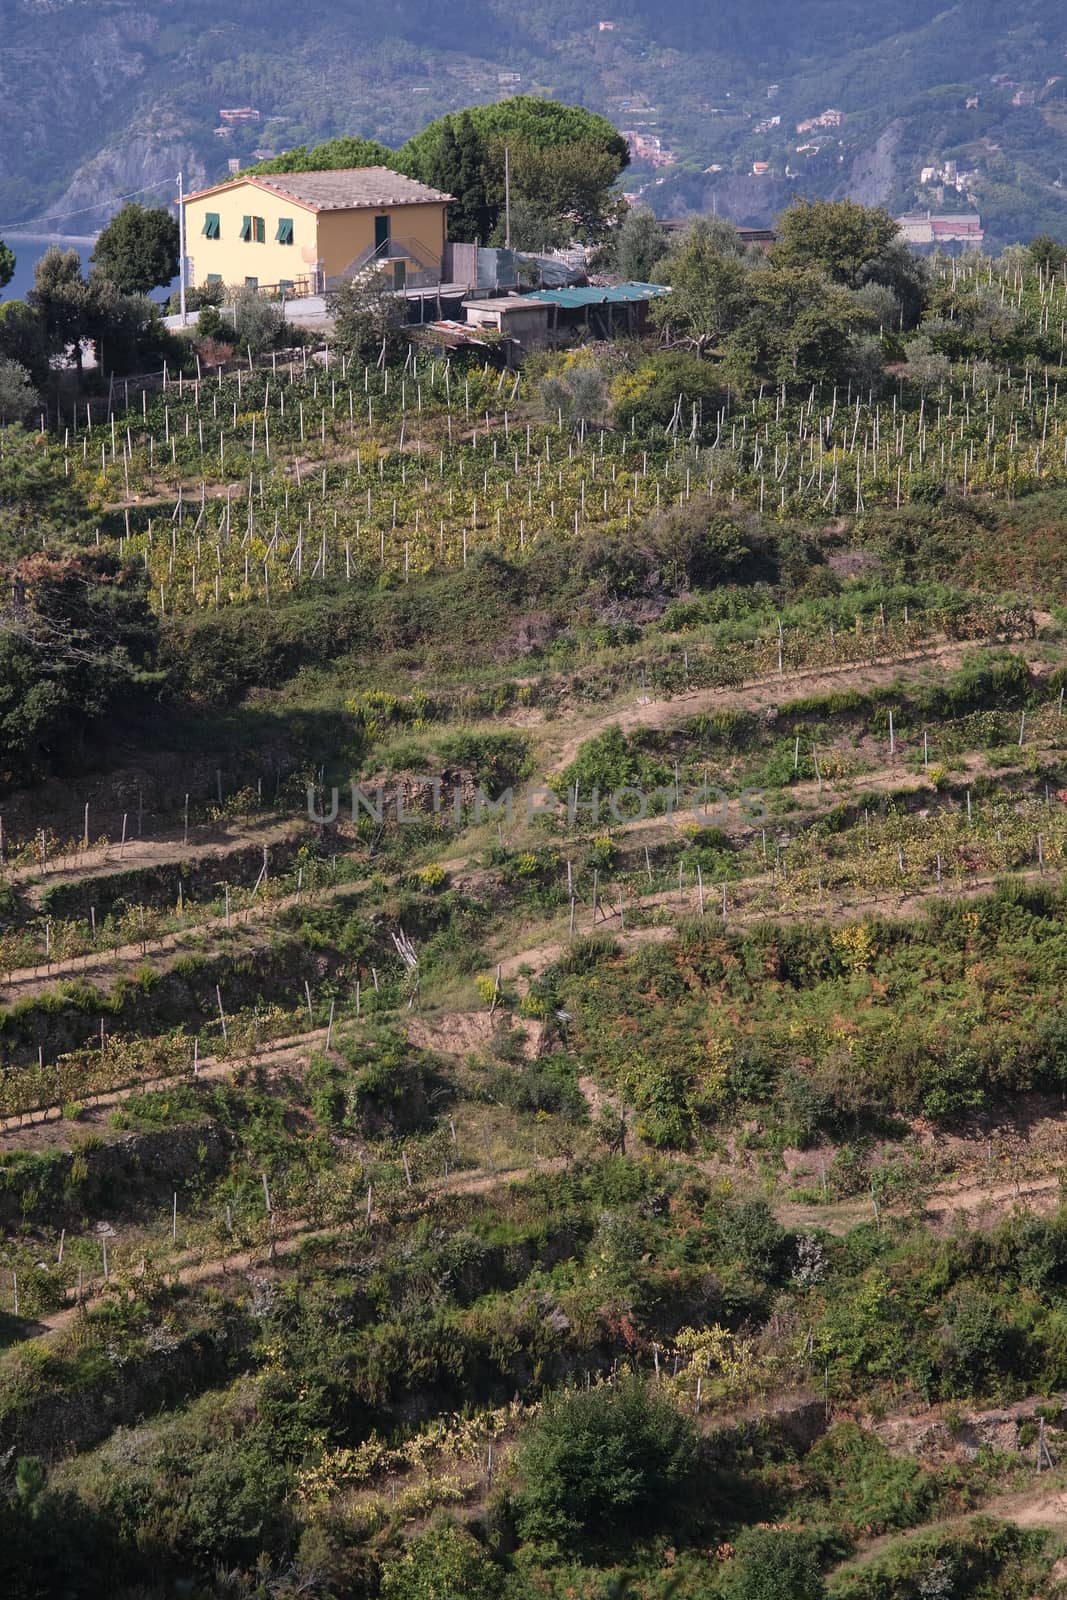 Vernazza, Cinque Terre, Italy. About october 2019. Vineyard of grapes sciacchetrà on the hills of the Cinque Terre. Farm on the hill.